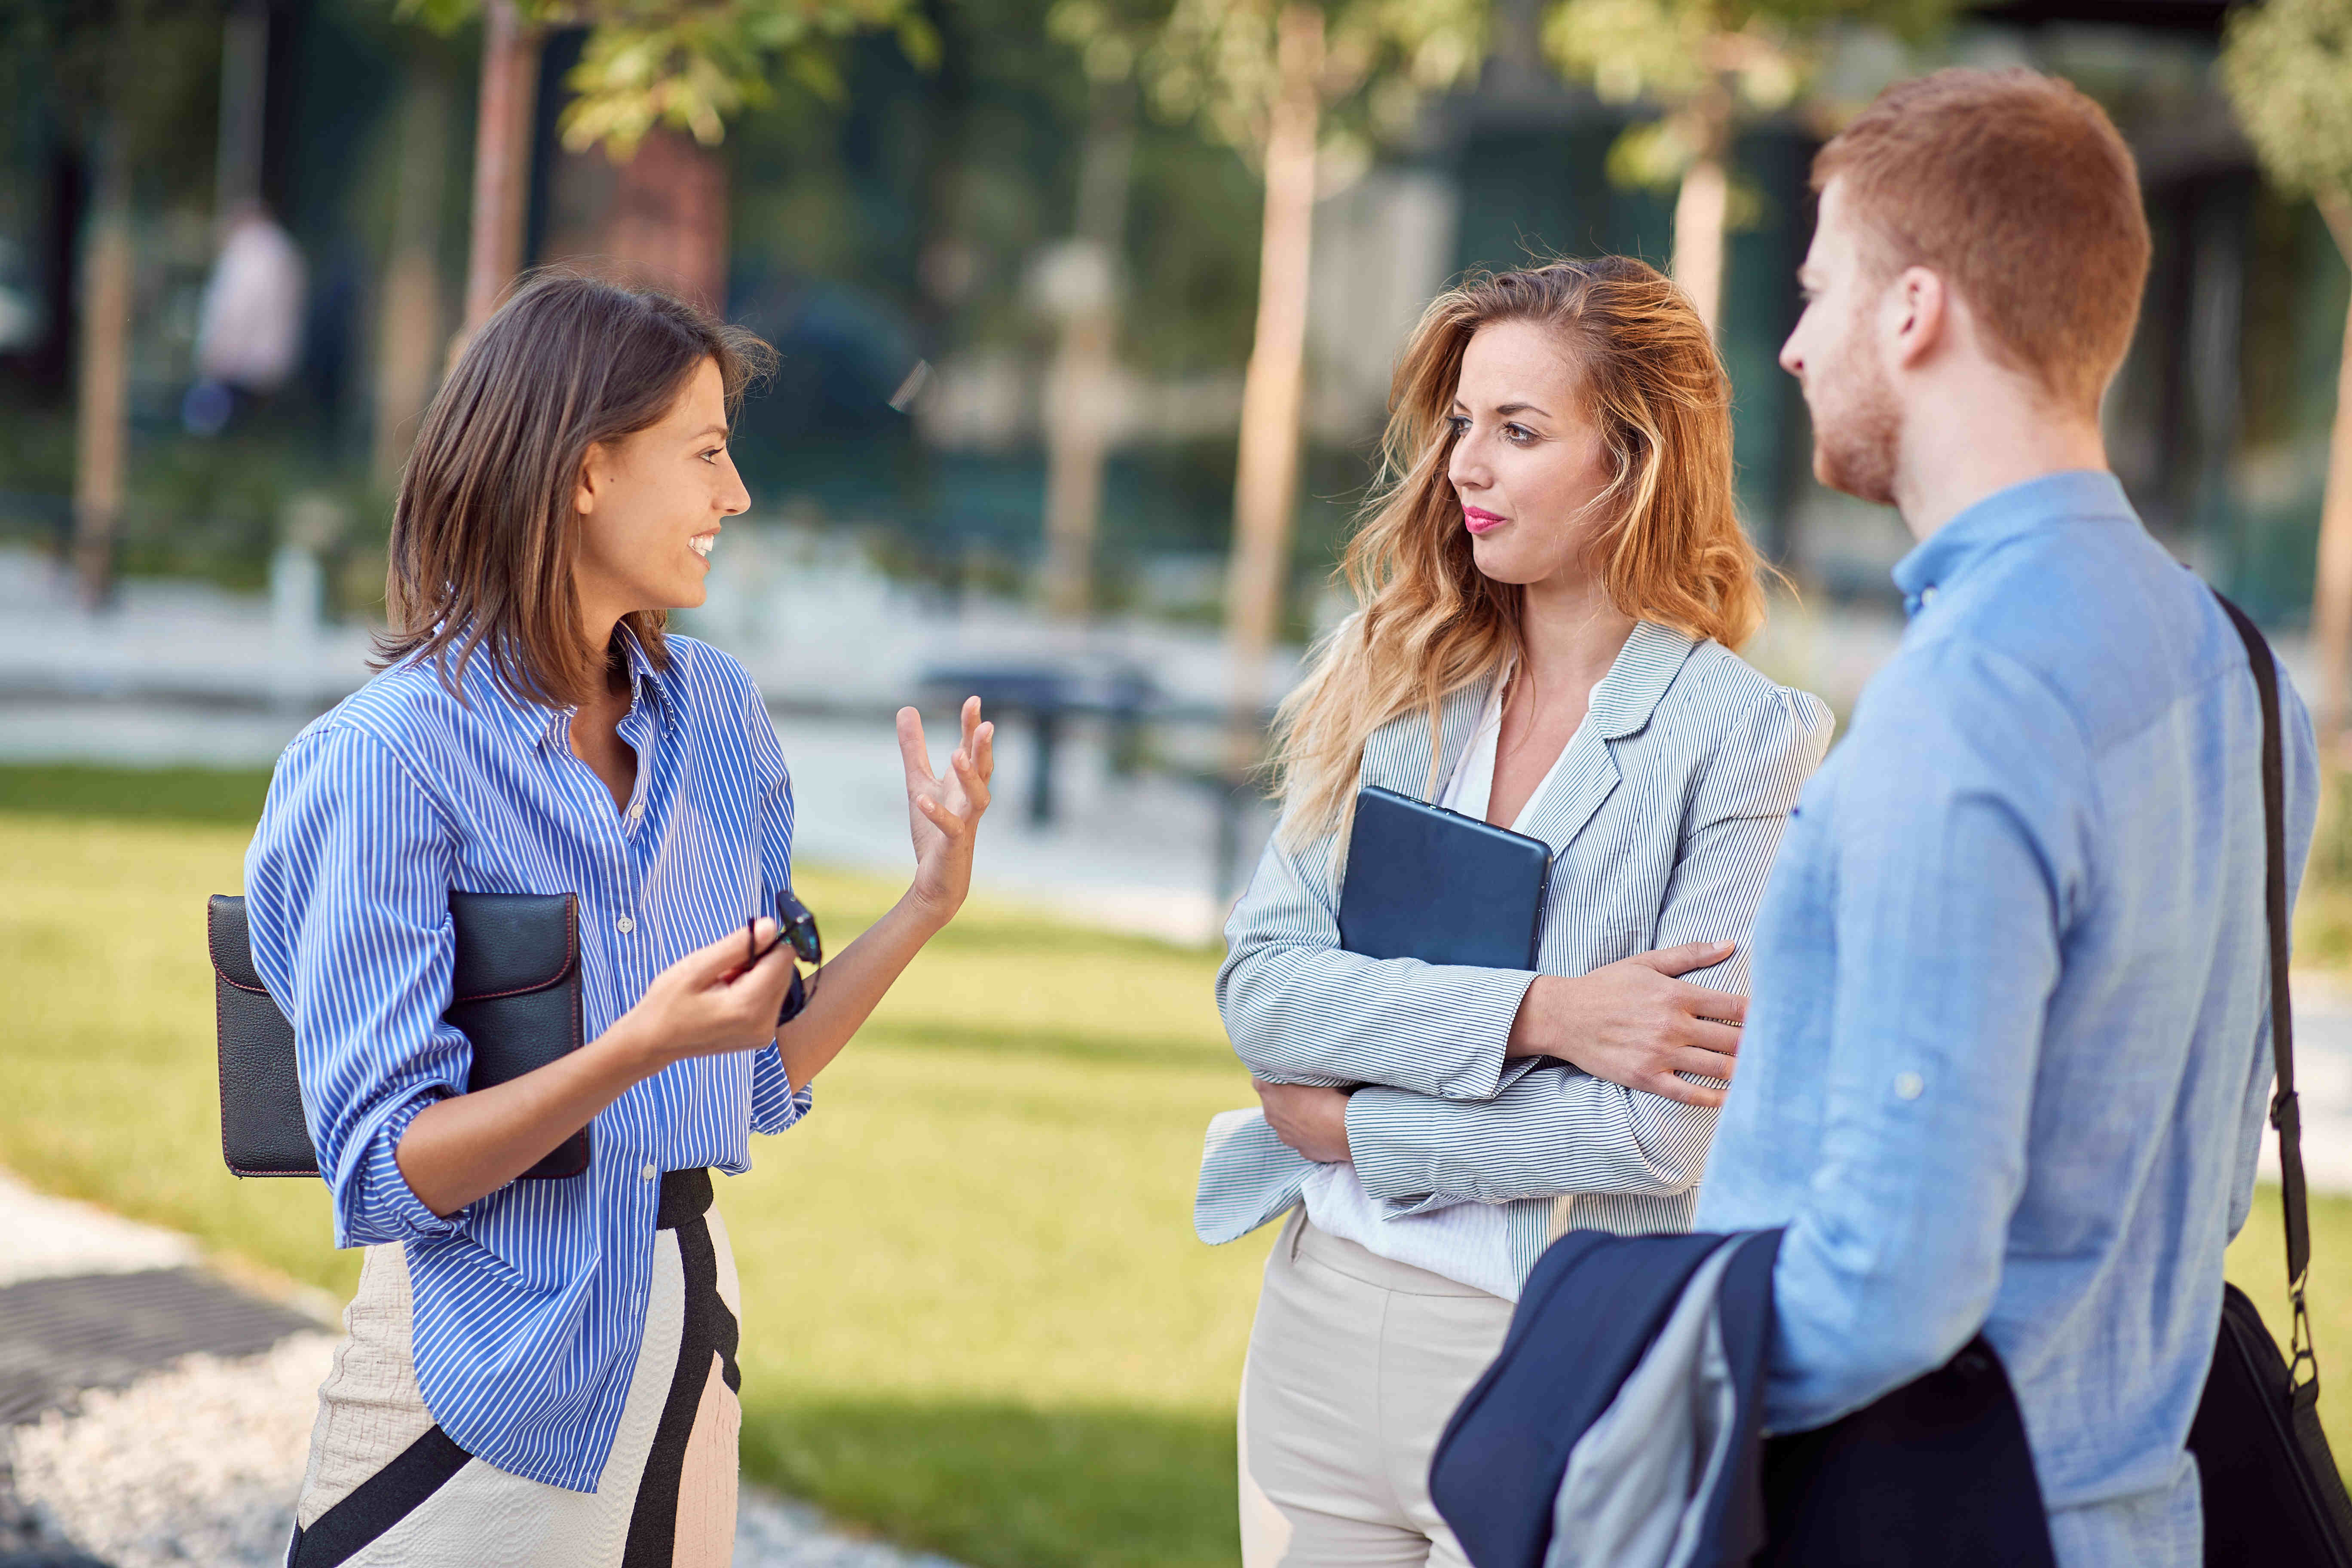 an image of a male and 2 females in business clothes chatting